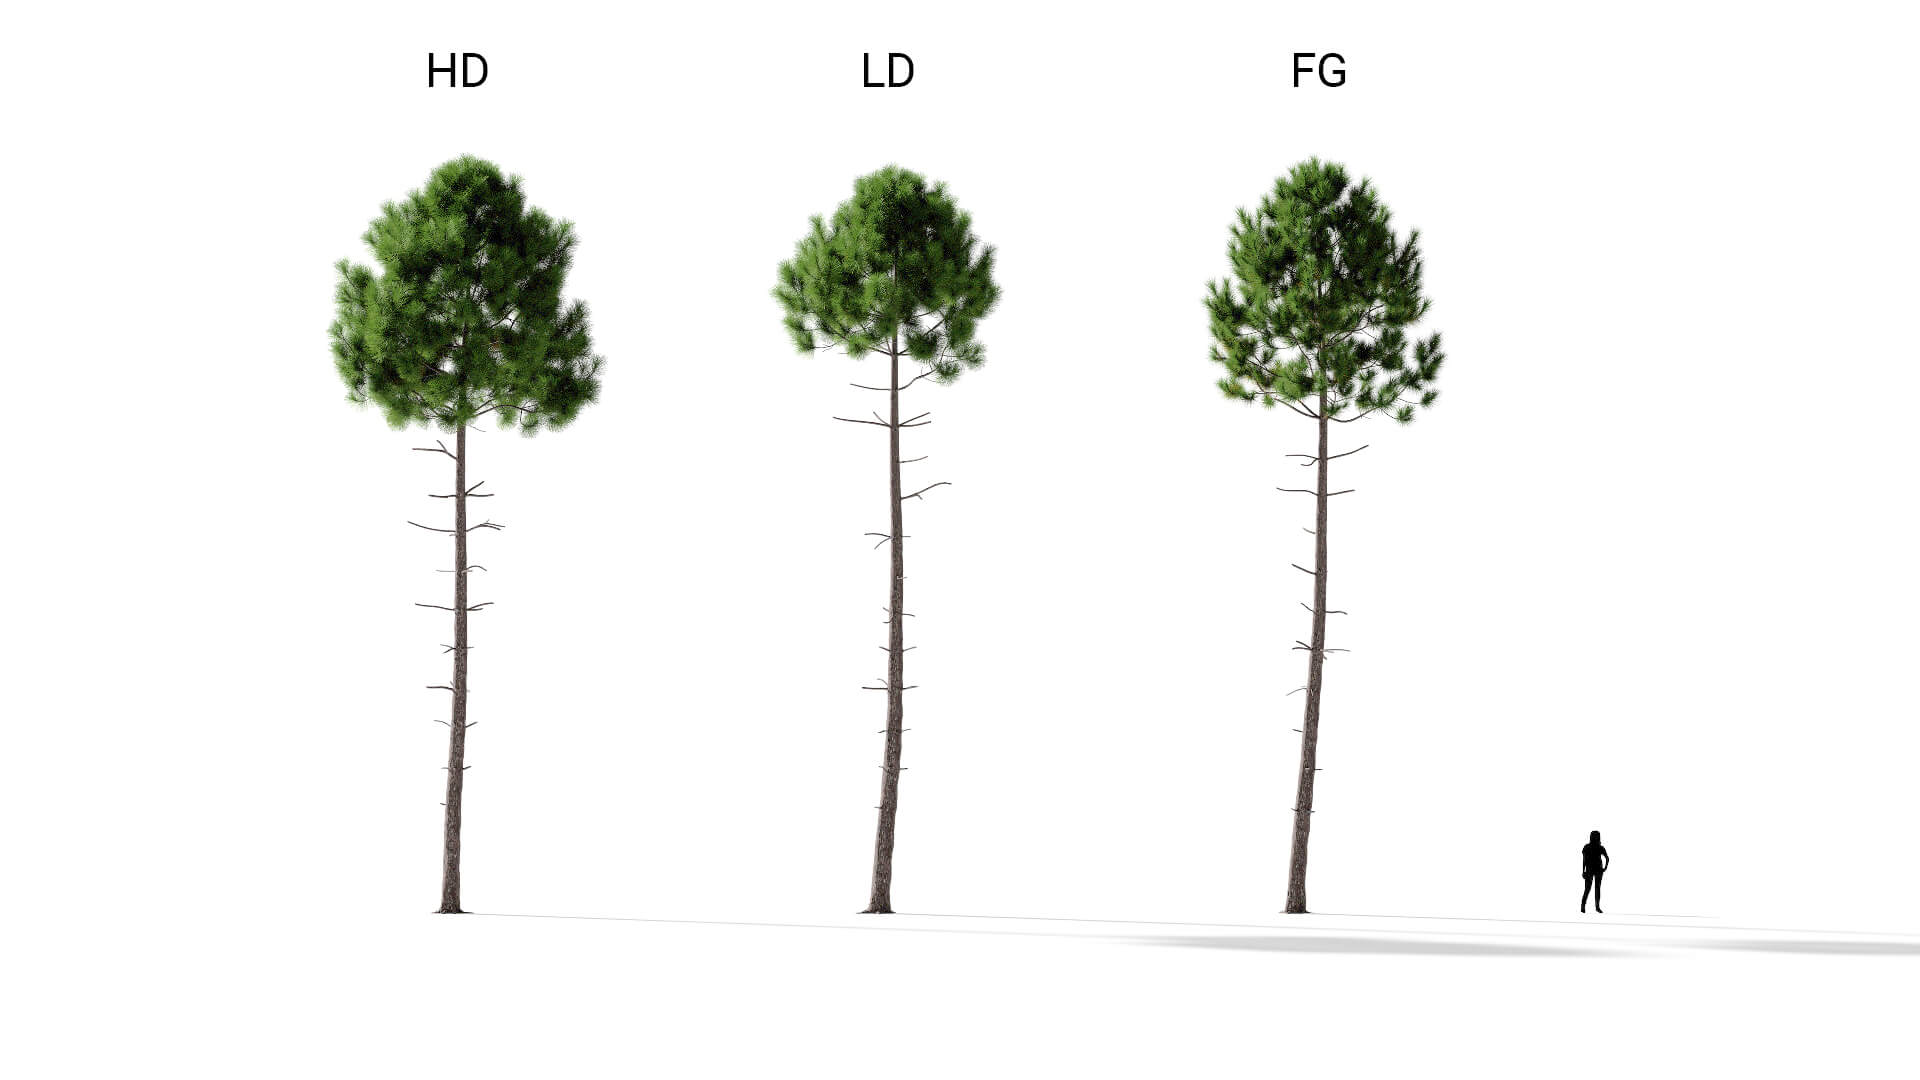 3D model of the Maritime pine forest Pinus pinaster forest included versions